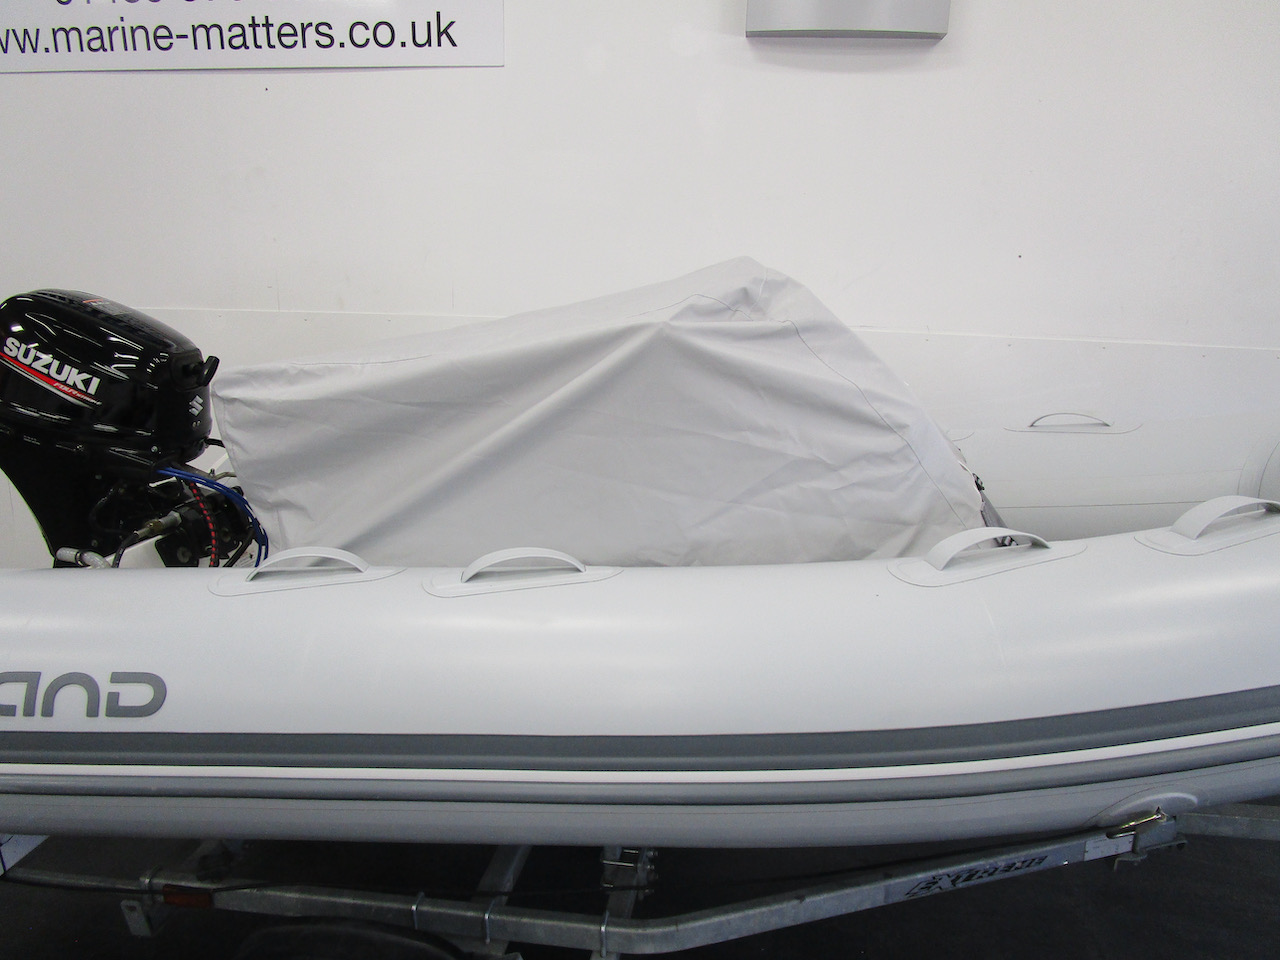 GRAND S330 RIB tender console and helm seat cover